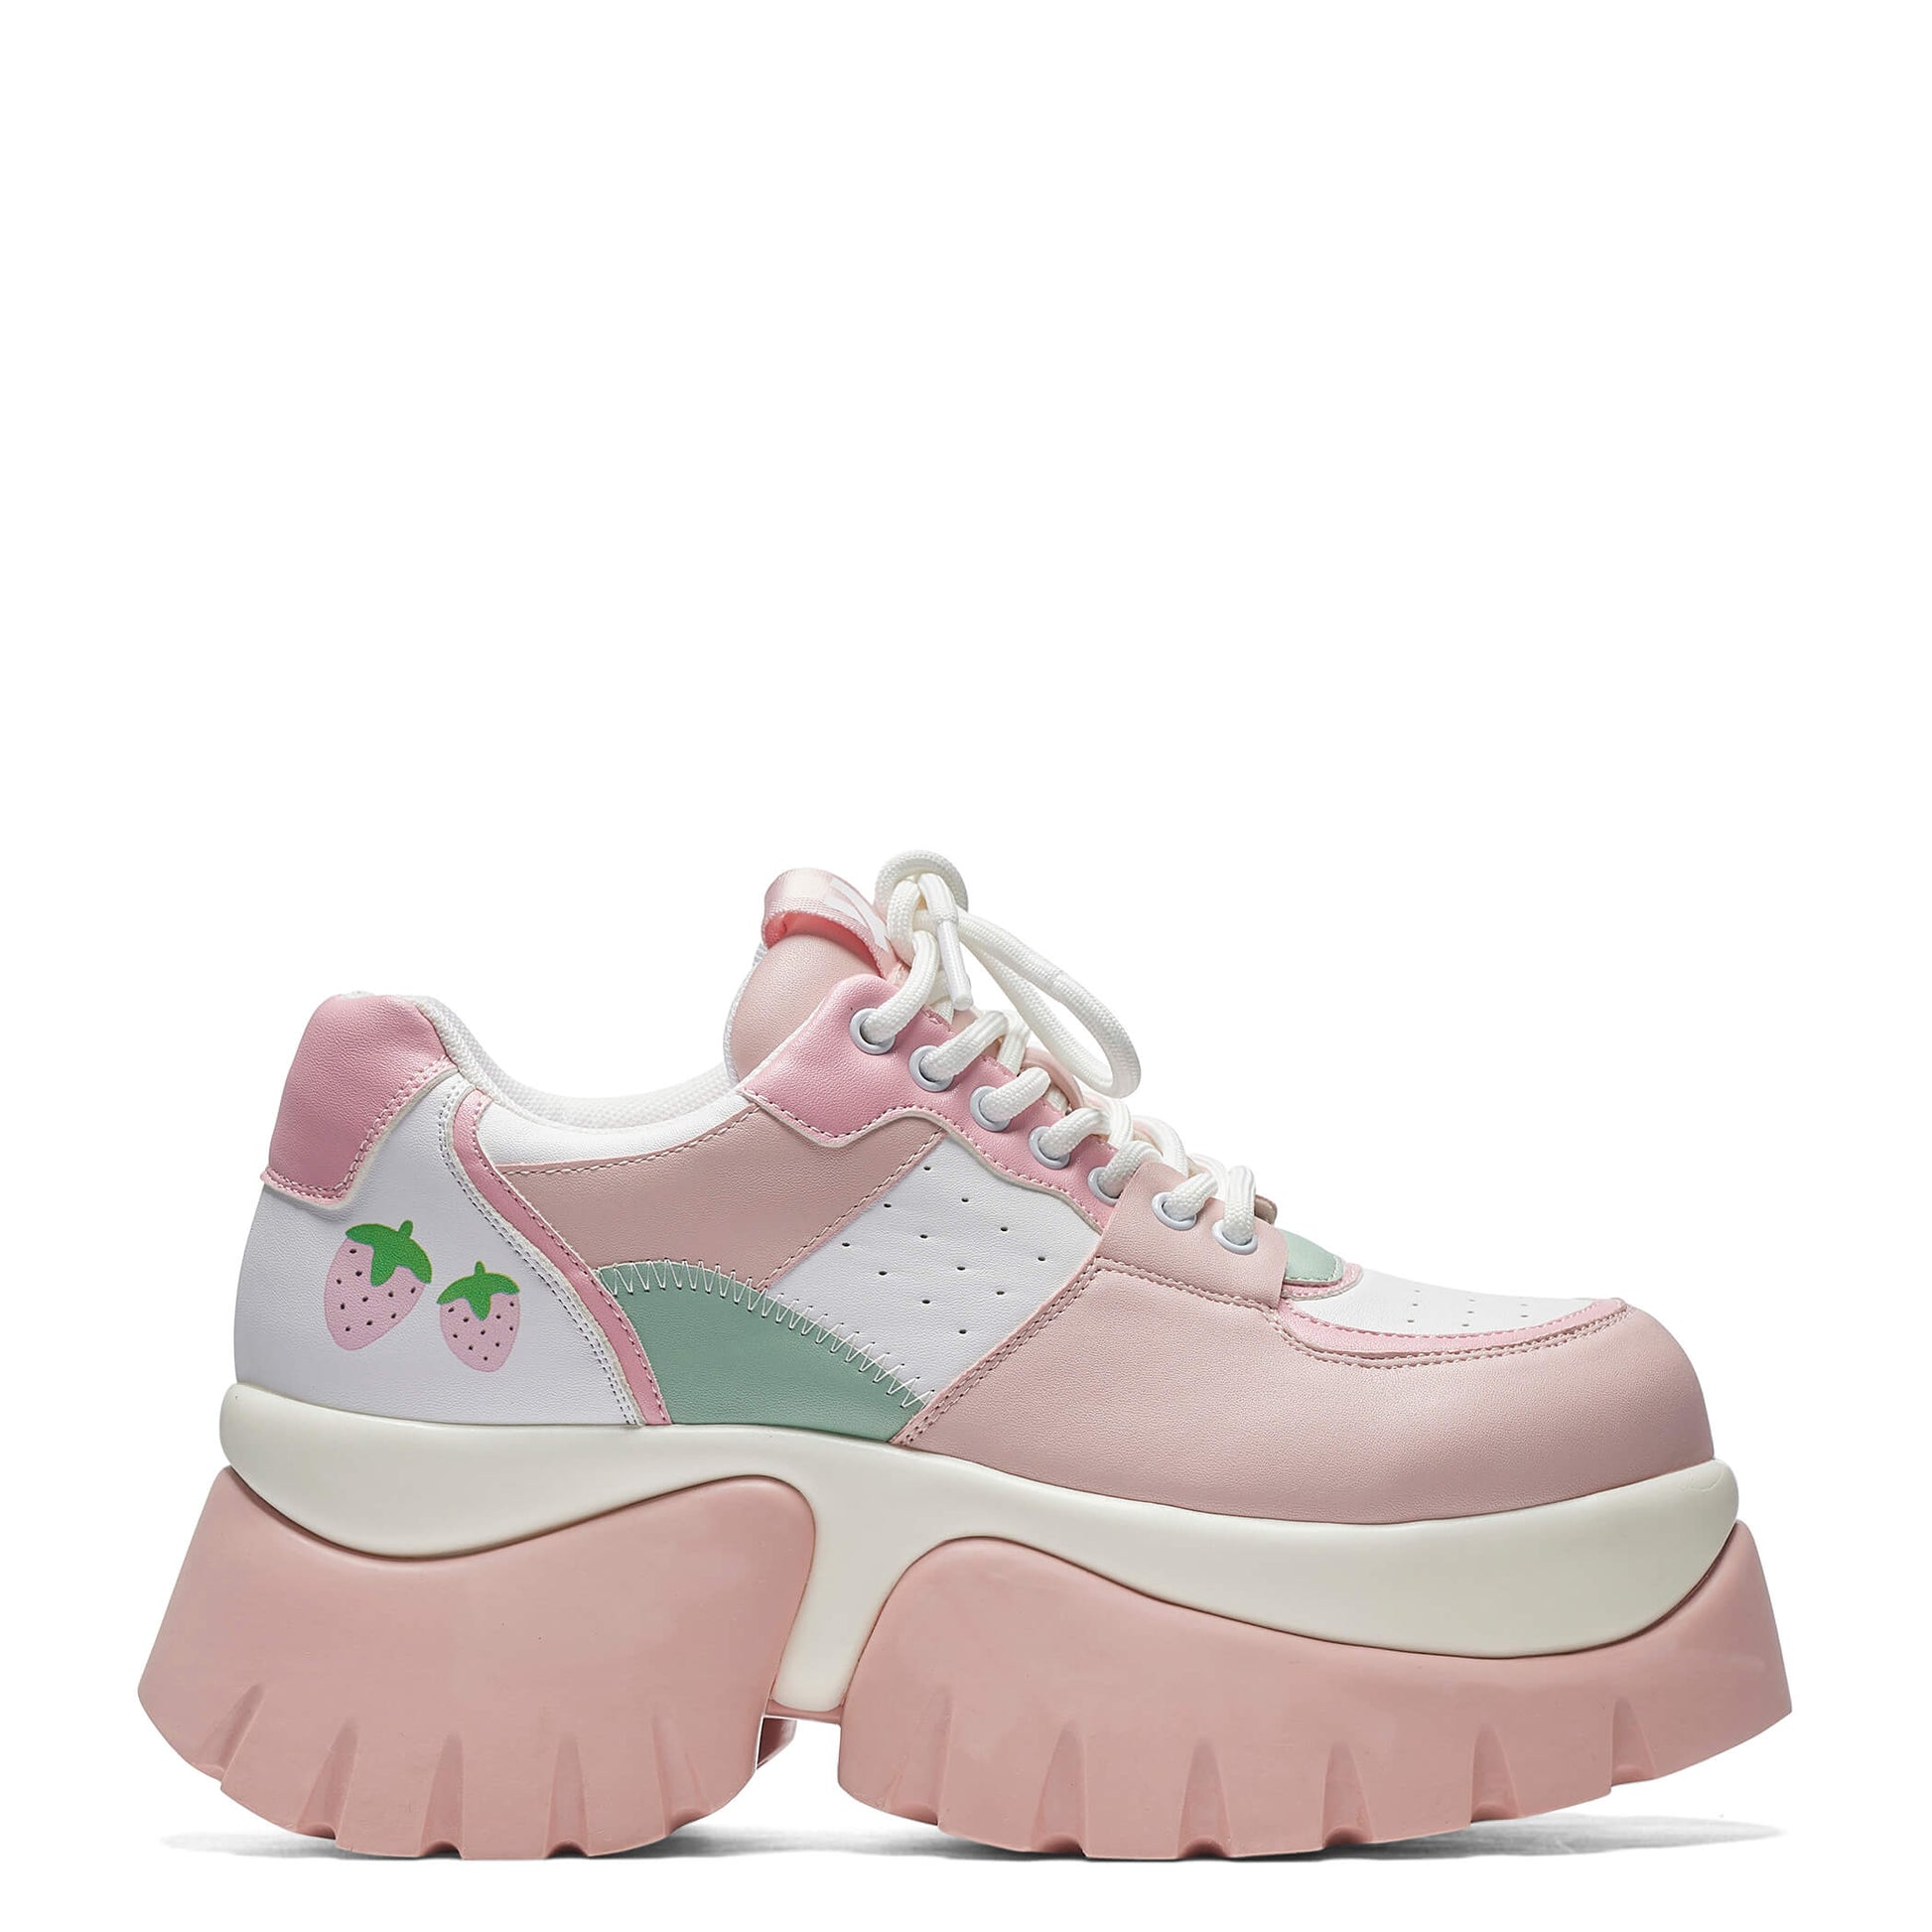 Strawberry Juice Trainers - Trainers - KOI Footwear - Pink - Side View